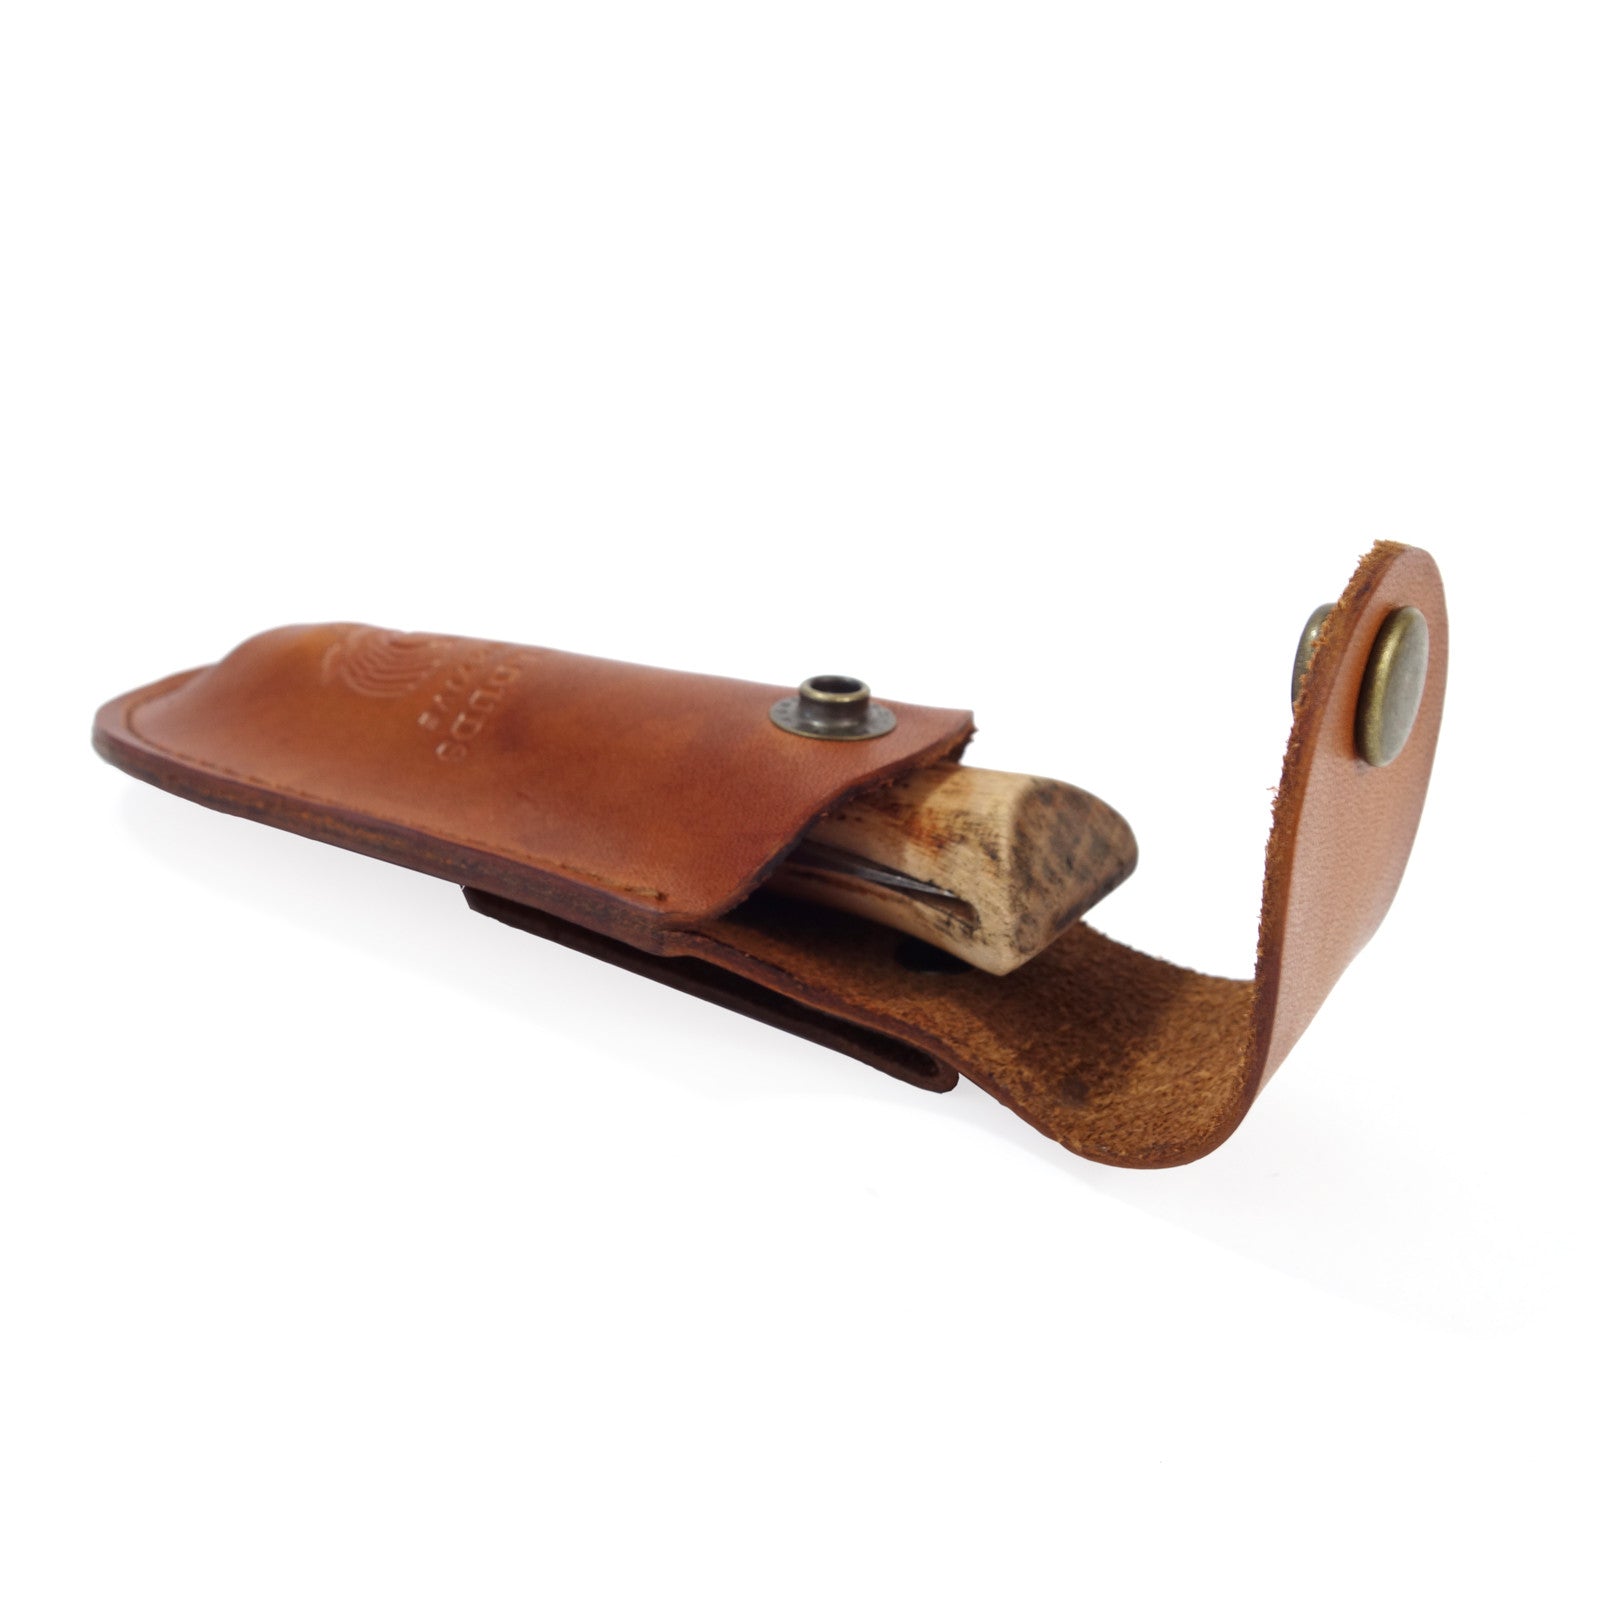 Eastwood Tobacco Pouch - Saddle Tan - Red Clouds Collective - Made